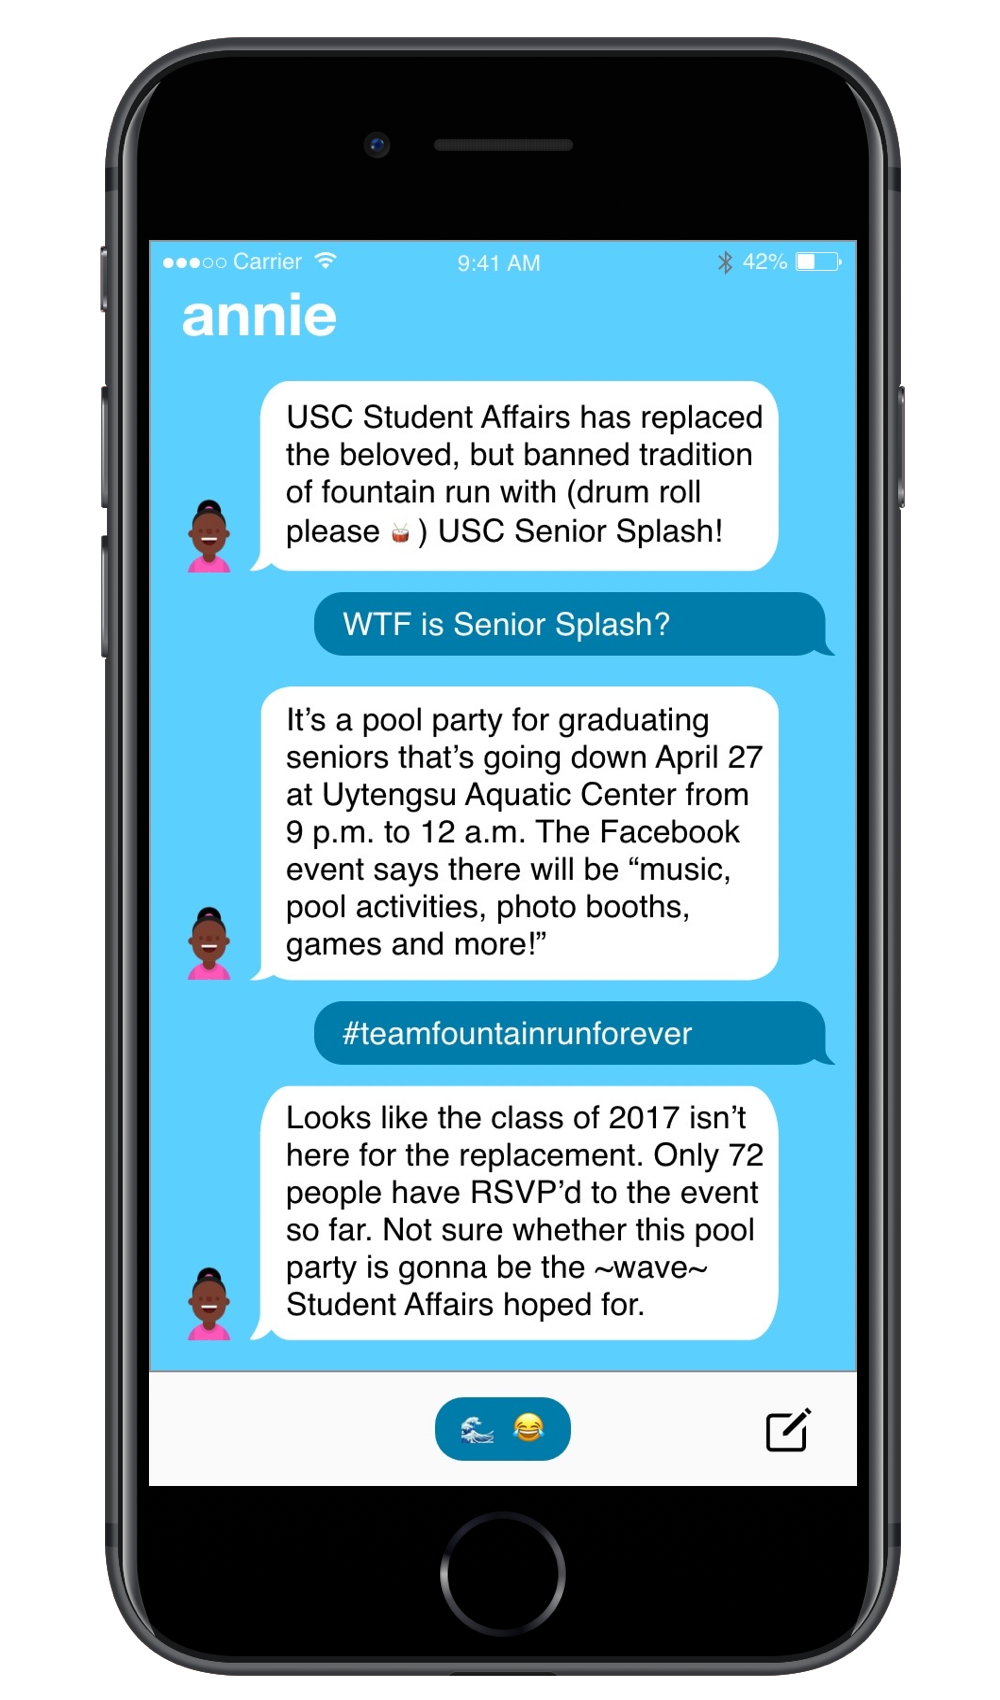 A chat screen in which the user is talking with the Annie bot about USC Senior Splash 2017.